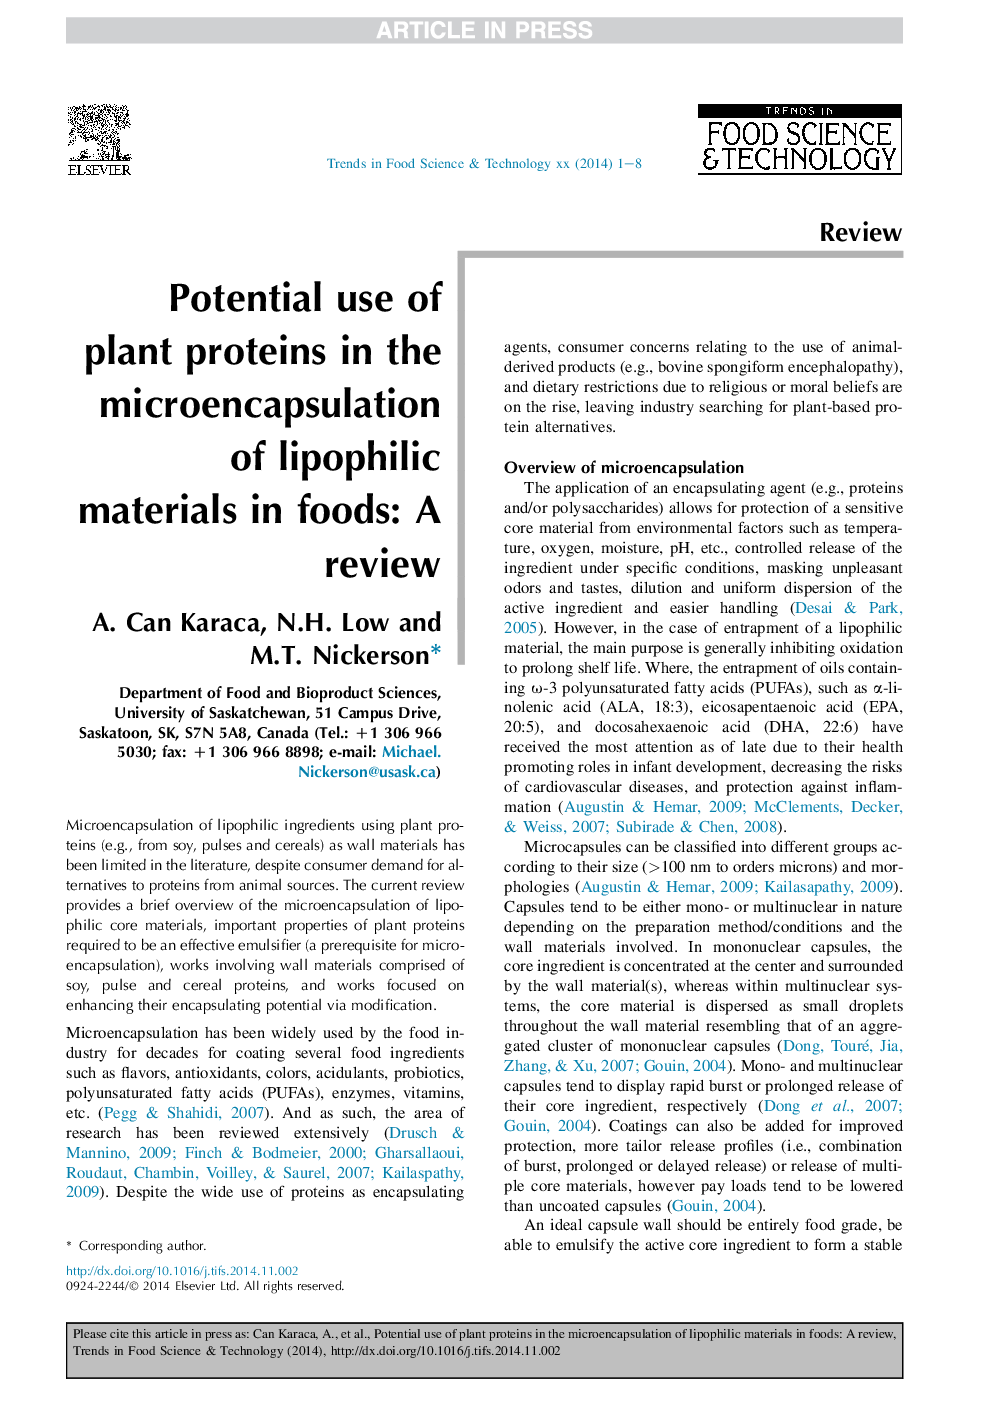 Potential use of plant proteins in the microencapsulation of lipophilic materials in foods